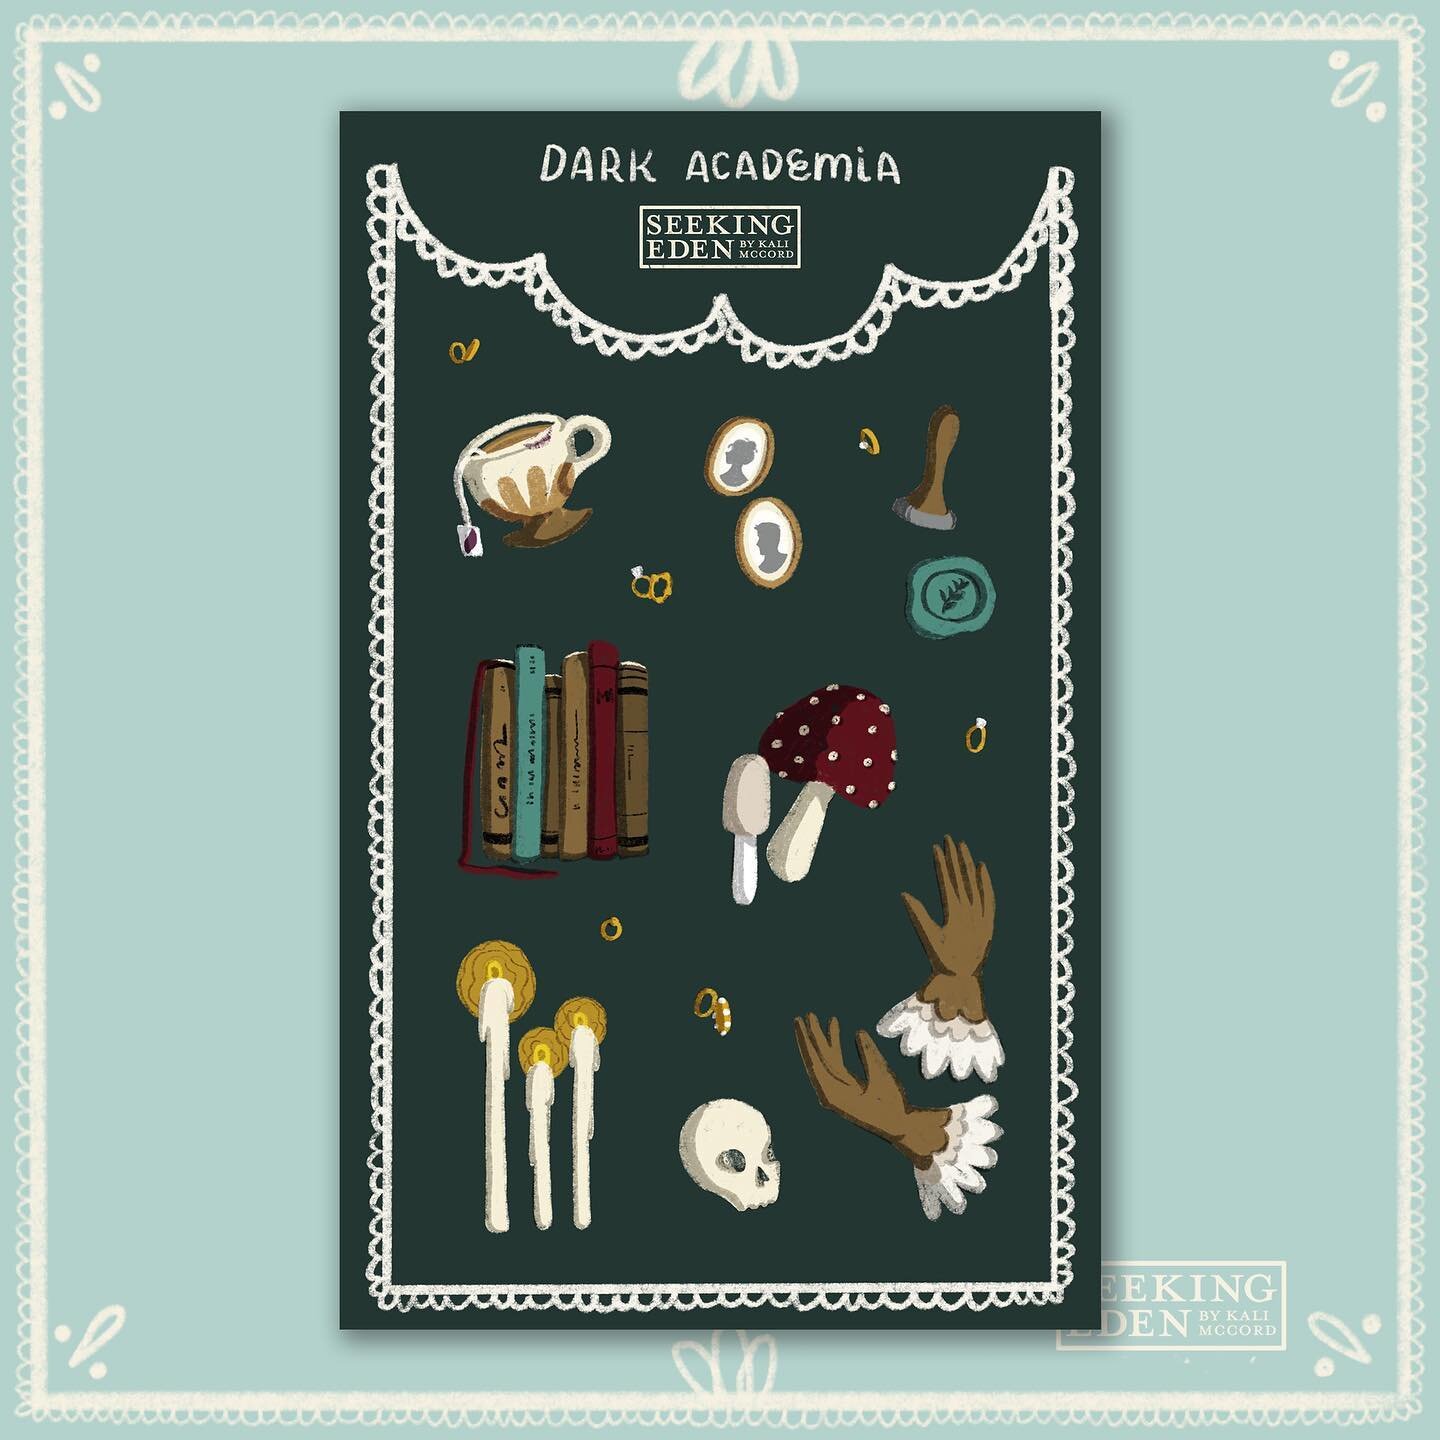 Dark academia stickers!! 🫖🕯
Ah I can&rsquo;t get enough of these sweet teacups and moody candles! Find this 5x8&rdquo; sticker sheet in the Seeking Eden Etsy store!!

#darkacademia #dark #stickers #skull #teacup #stickersheet #stickersheets #seekin